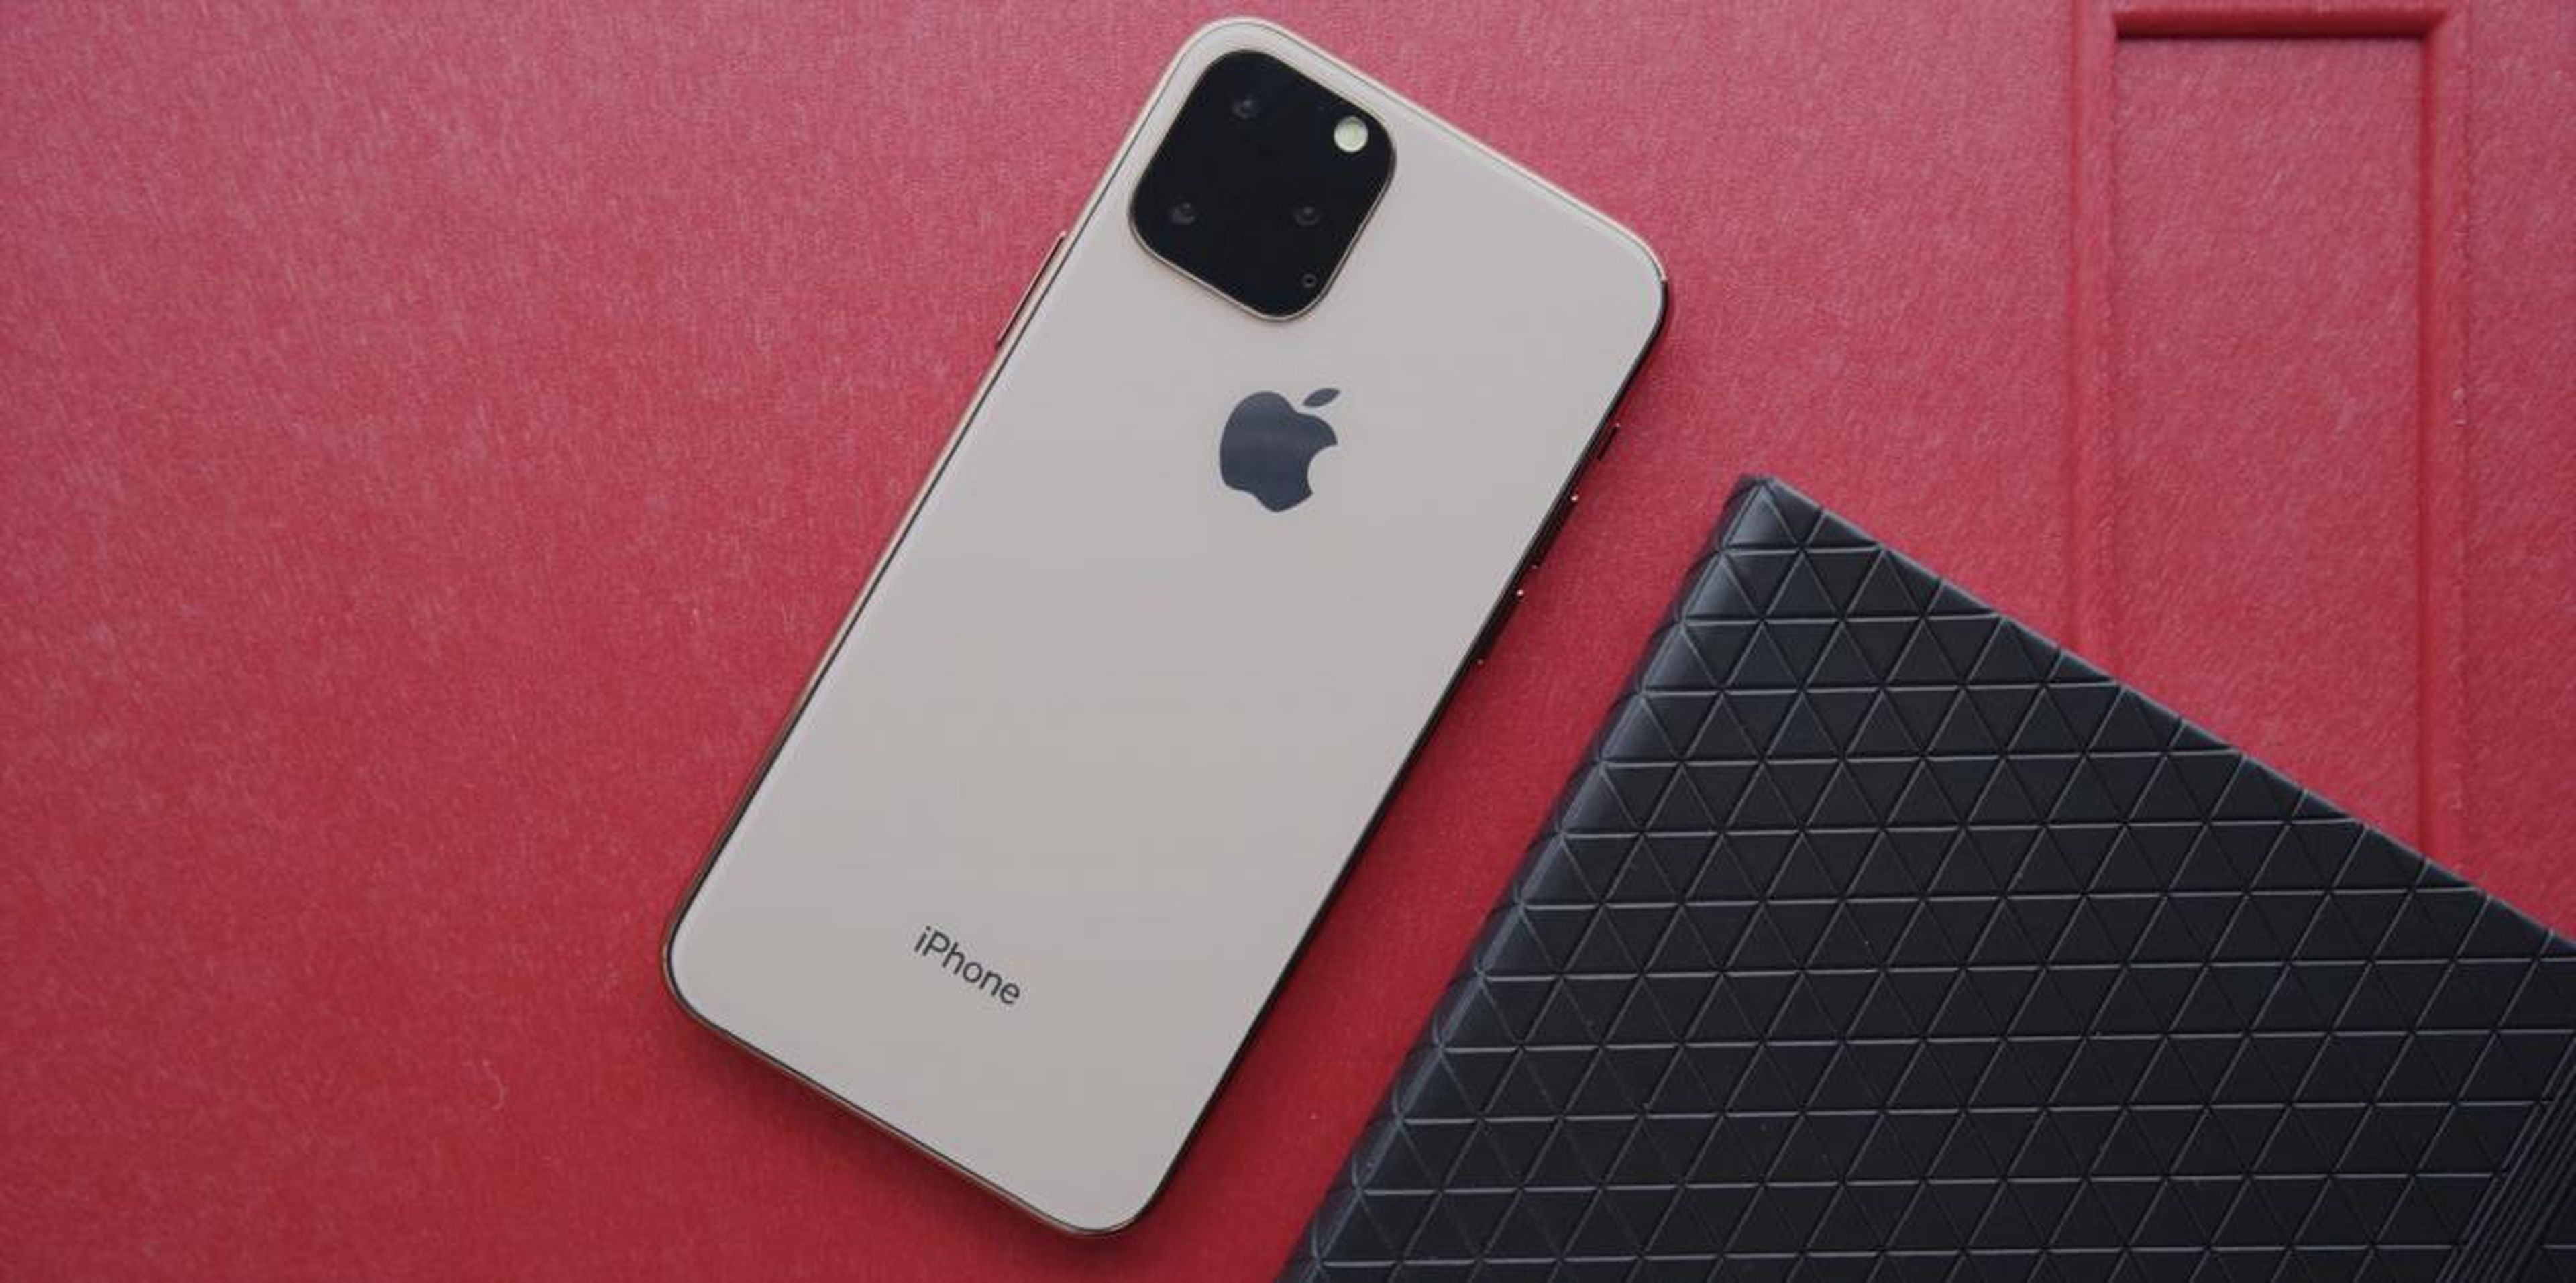 We're not expecting many more smartphone announcements in August, but the real fun starts in September with Apple's next iPhone, presumably called the iPhone 11. (That's because we've had two years of the iPhone X, pronounced "ten